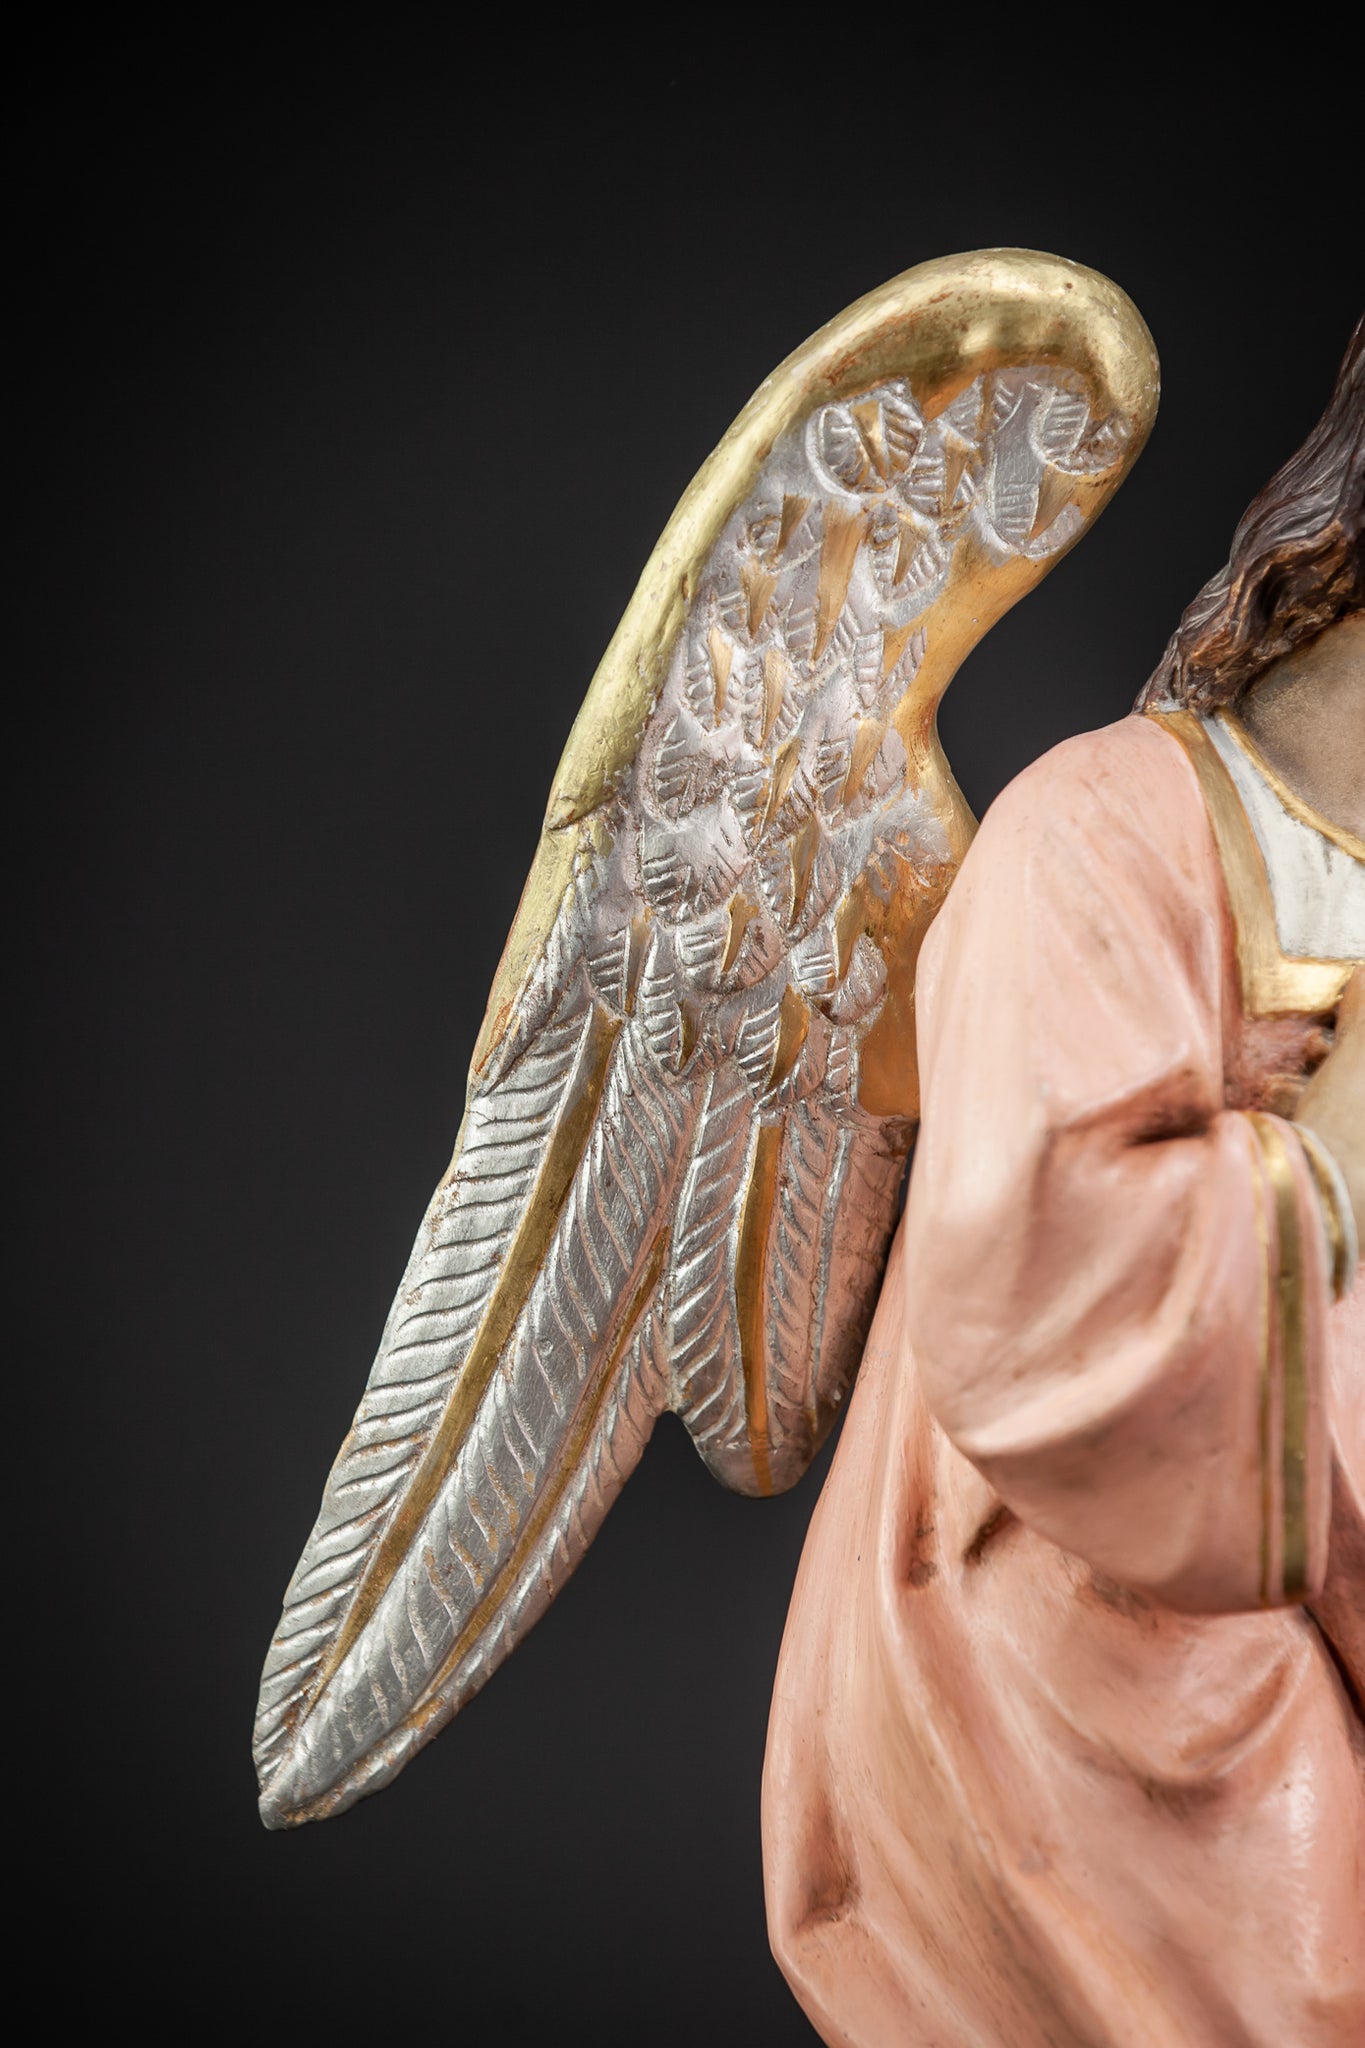 Pair of Antique Wooden Altar Angels | 18.3"